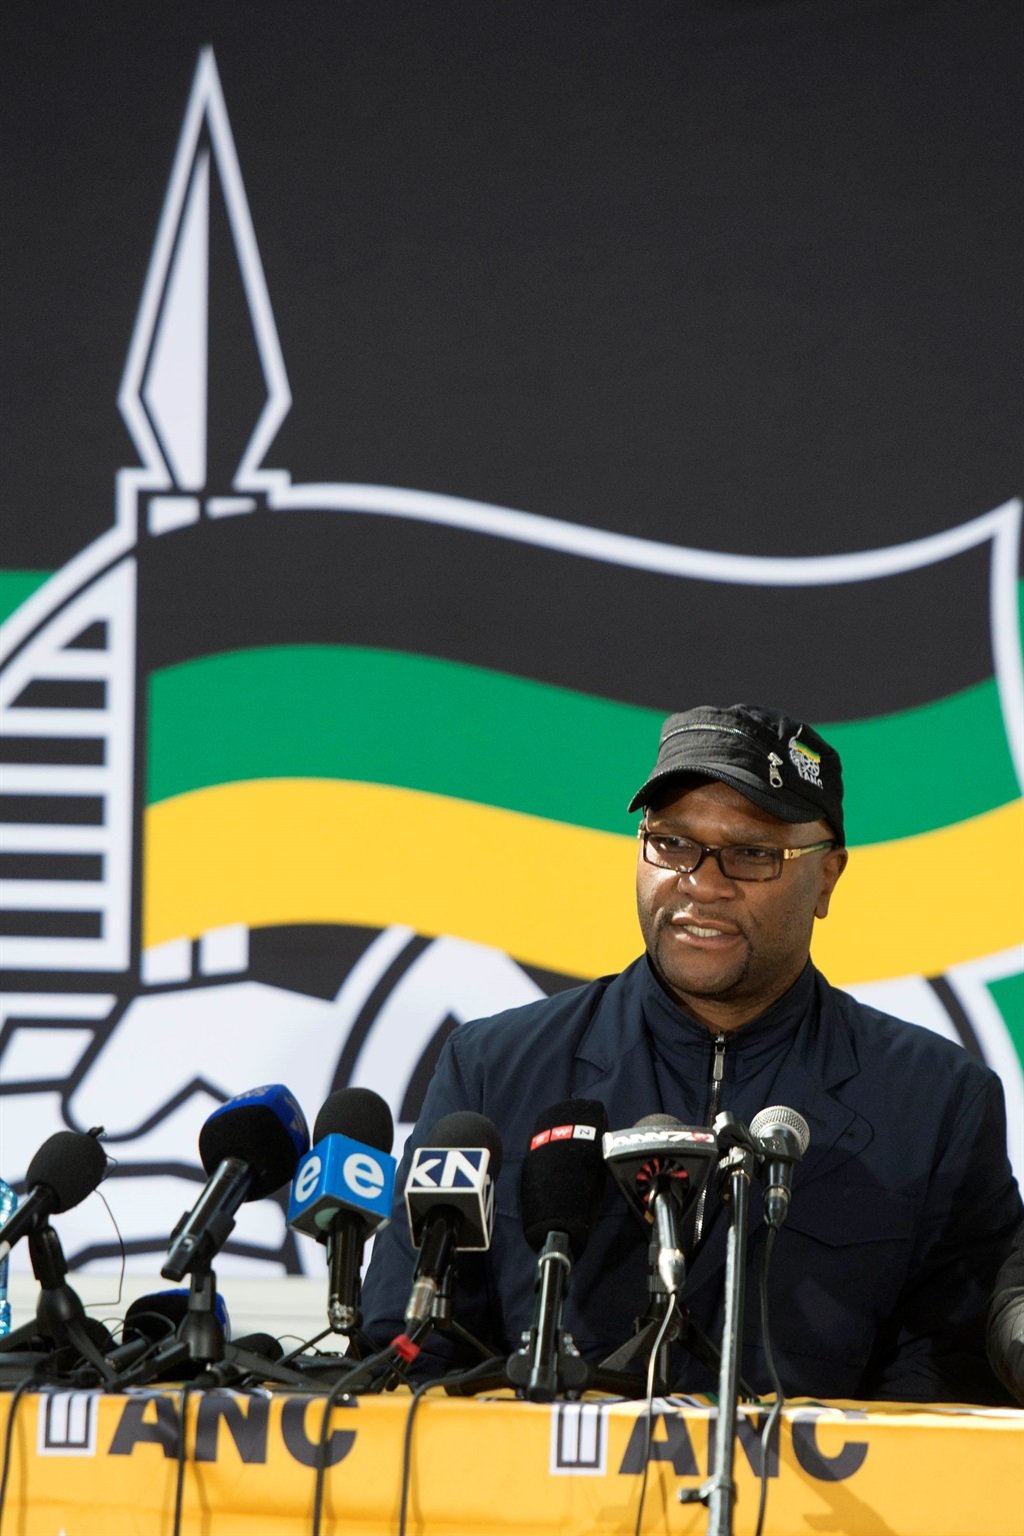  Nathi Mthethwa at the ANC national policy conference on Monday July 3 2017. Picture: Deaan Vivier/Netwerk24